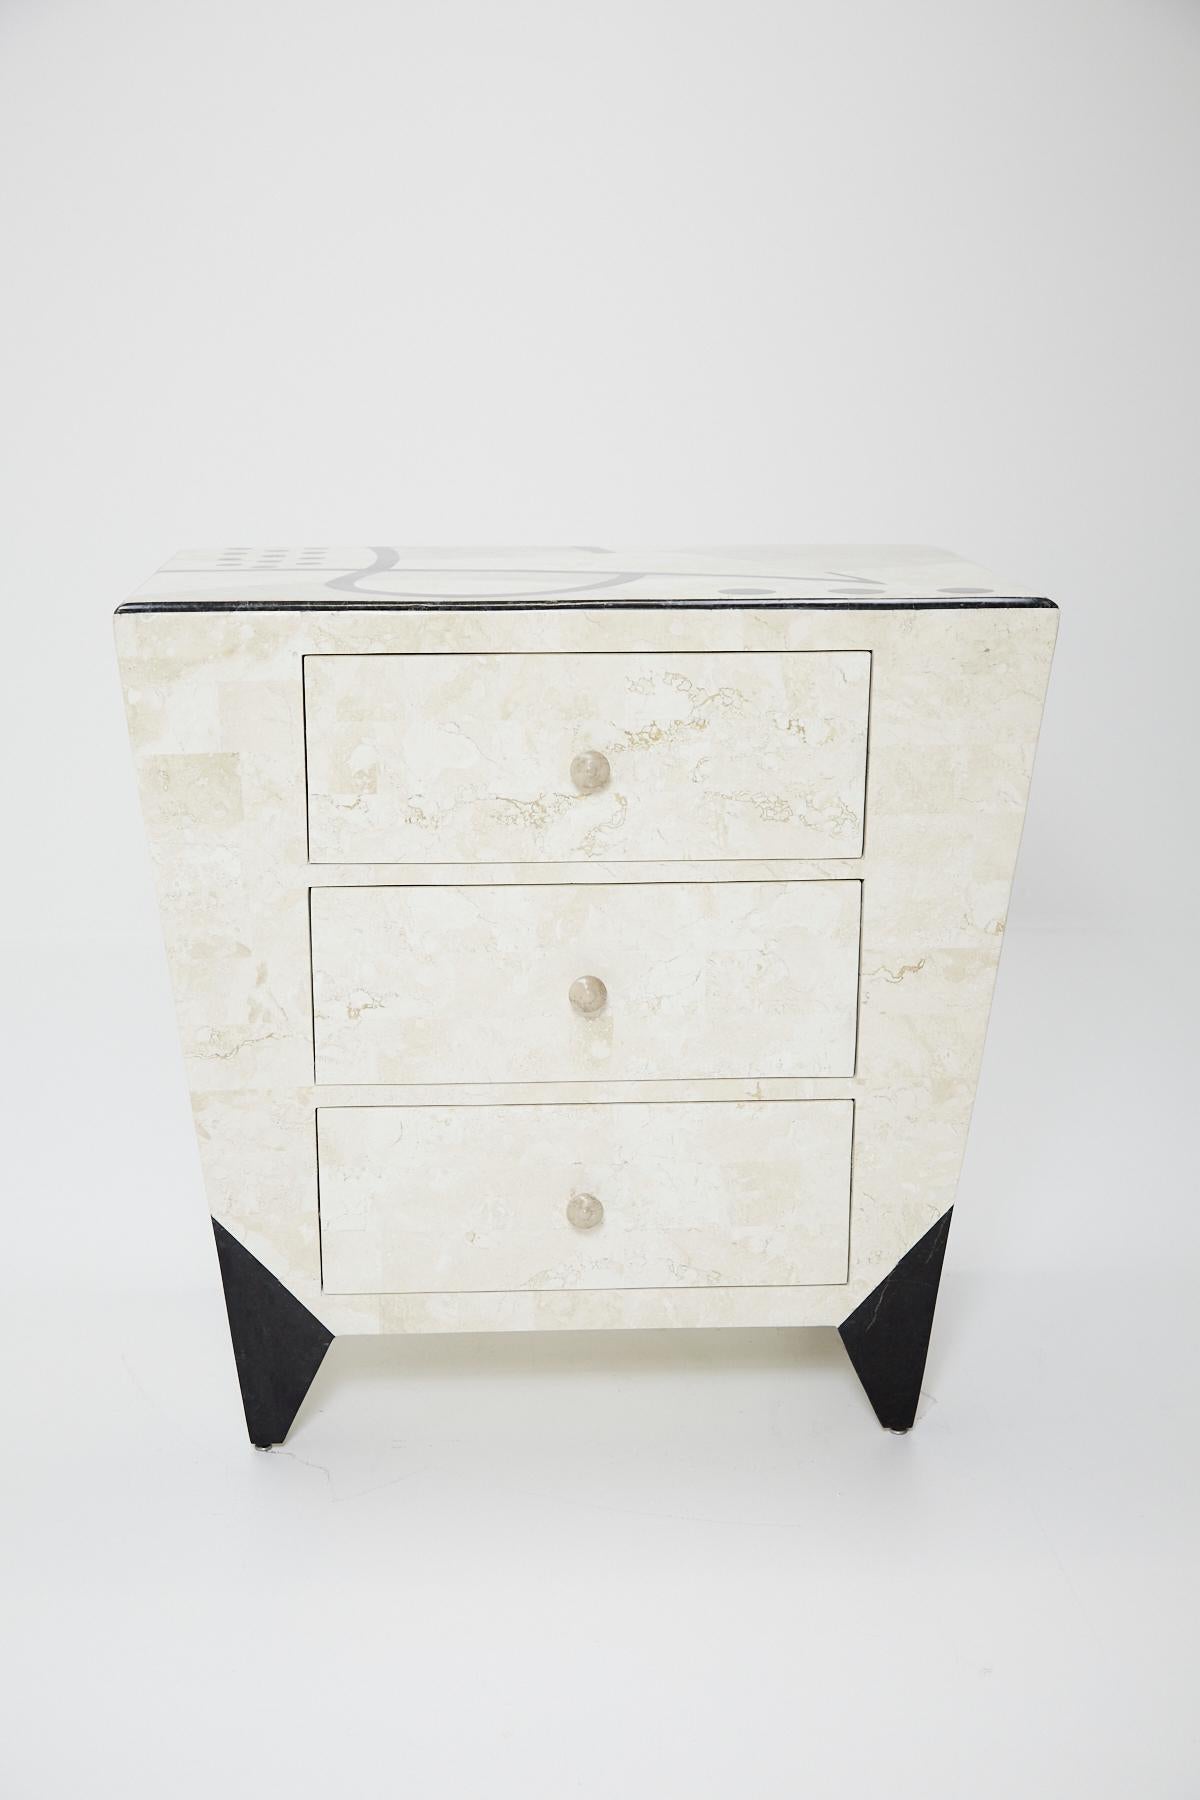 Fully covered tessellated stone square side table, small chest or nightstand with abstract Post Modern pattern across top in shades of white ivory, beige fossil and black inlaid stone. Stone inlaid over fiberglass body. Three front-facing